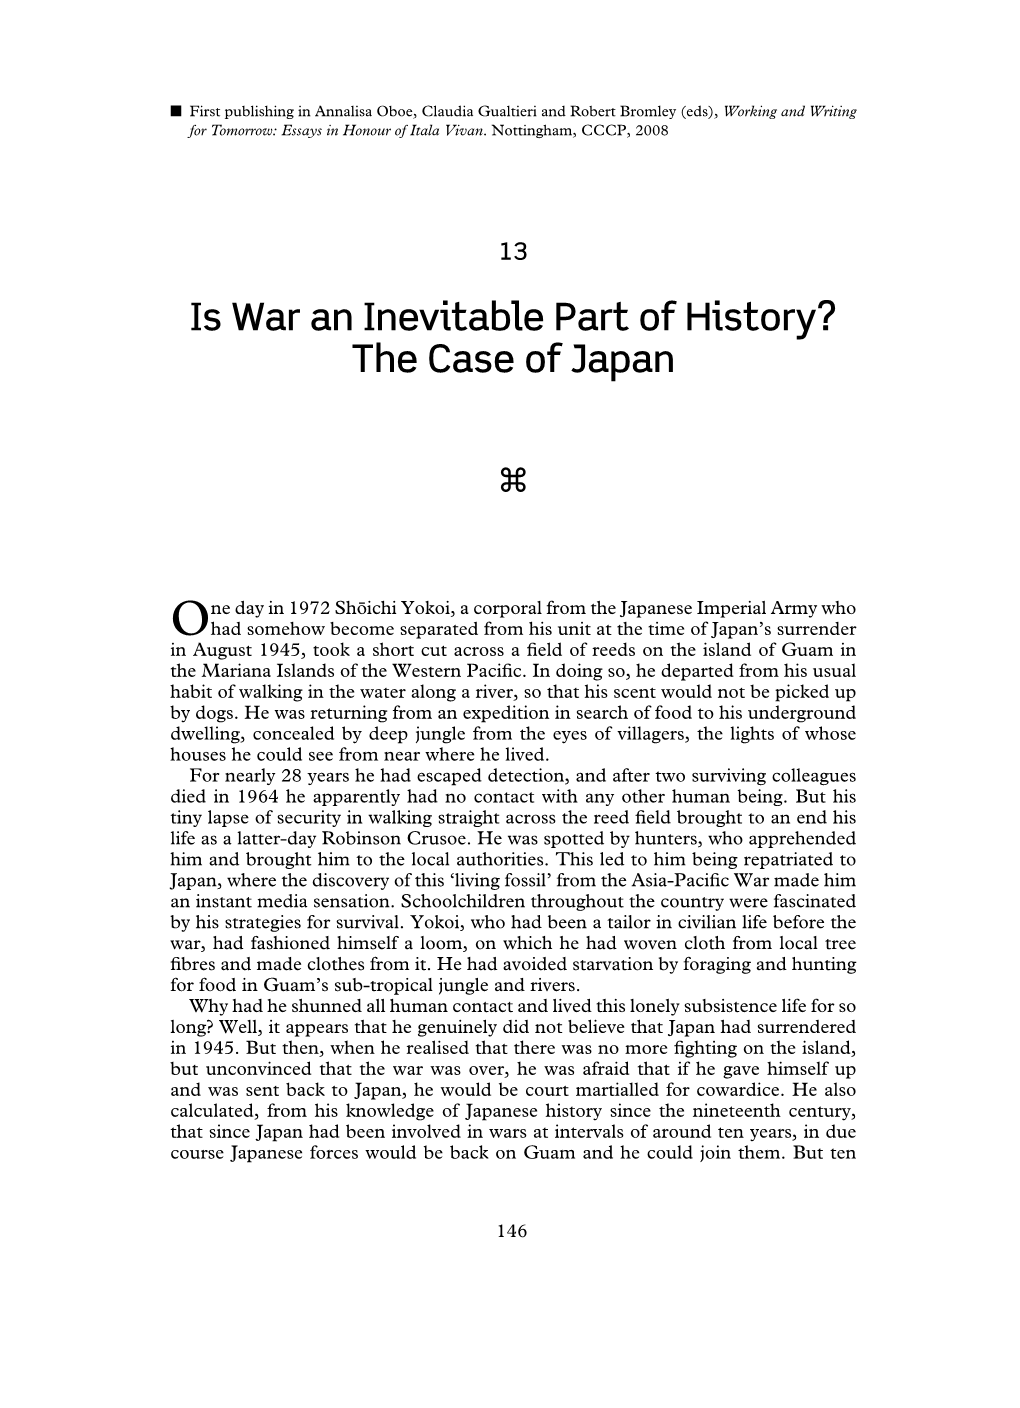 The Case of Japan